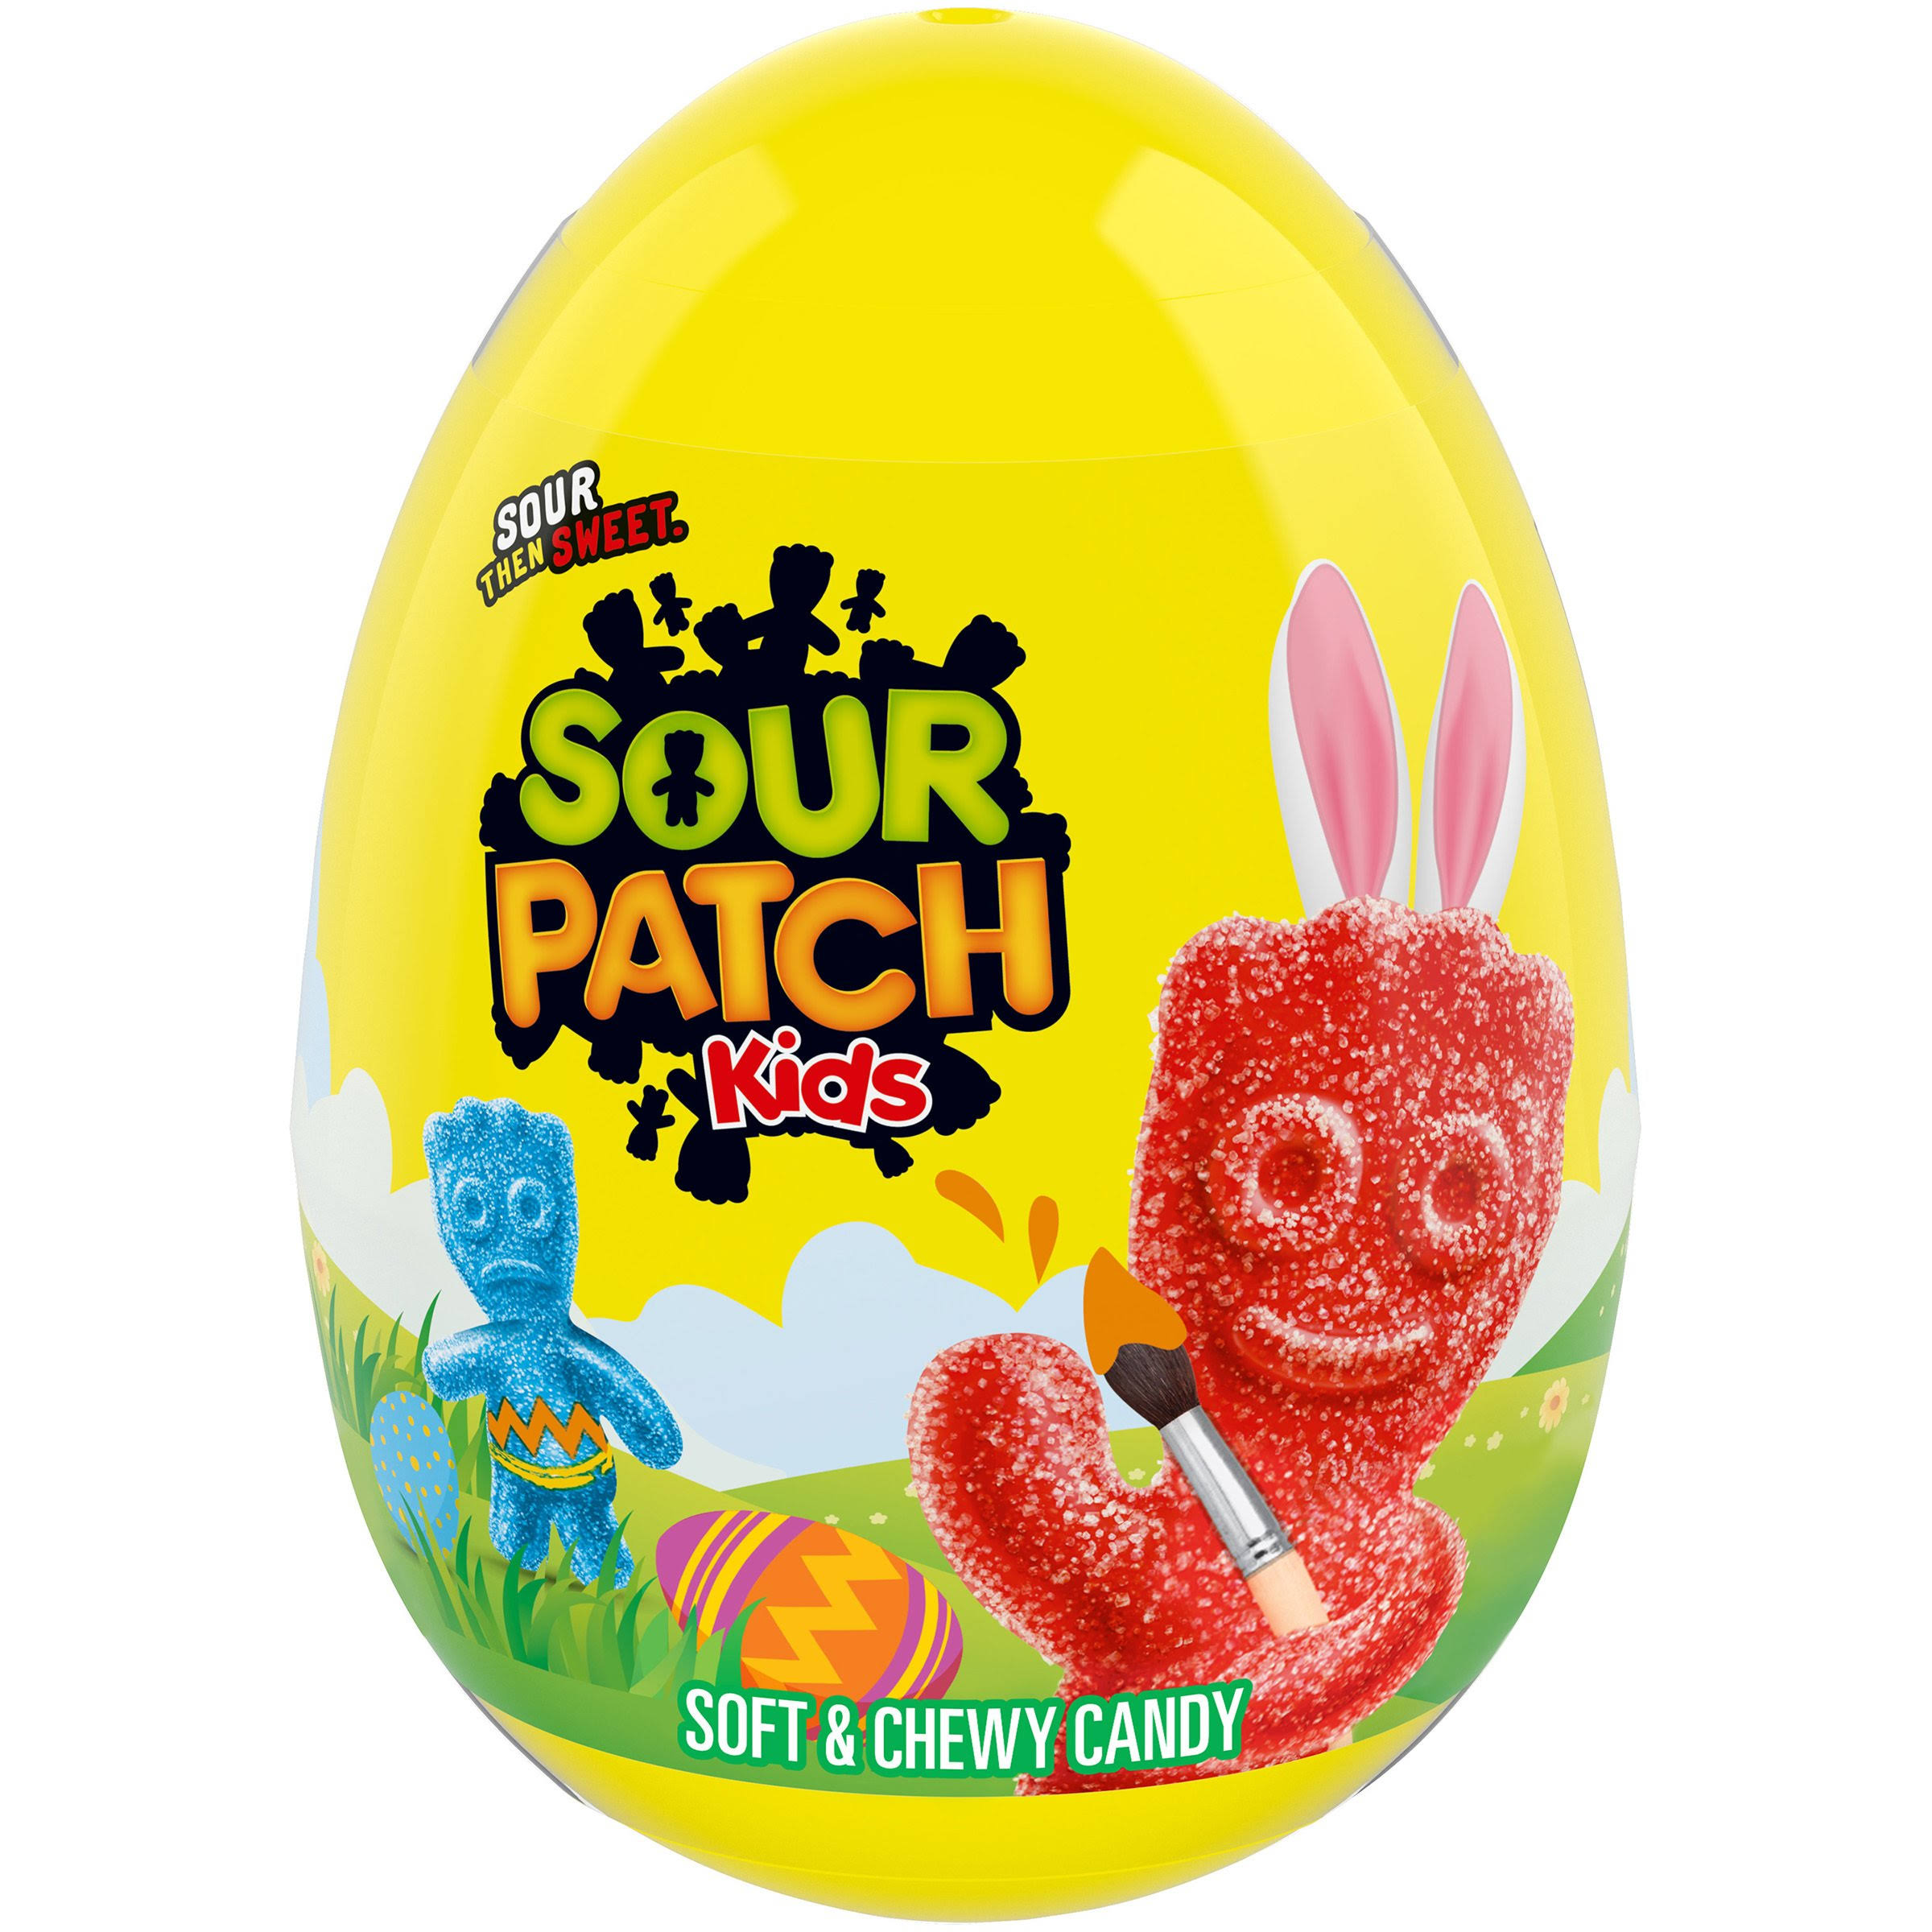 Sour Patch Kids Soft & Chewy Candy Easter Eggs - 1.1oz